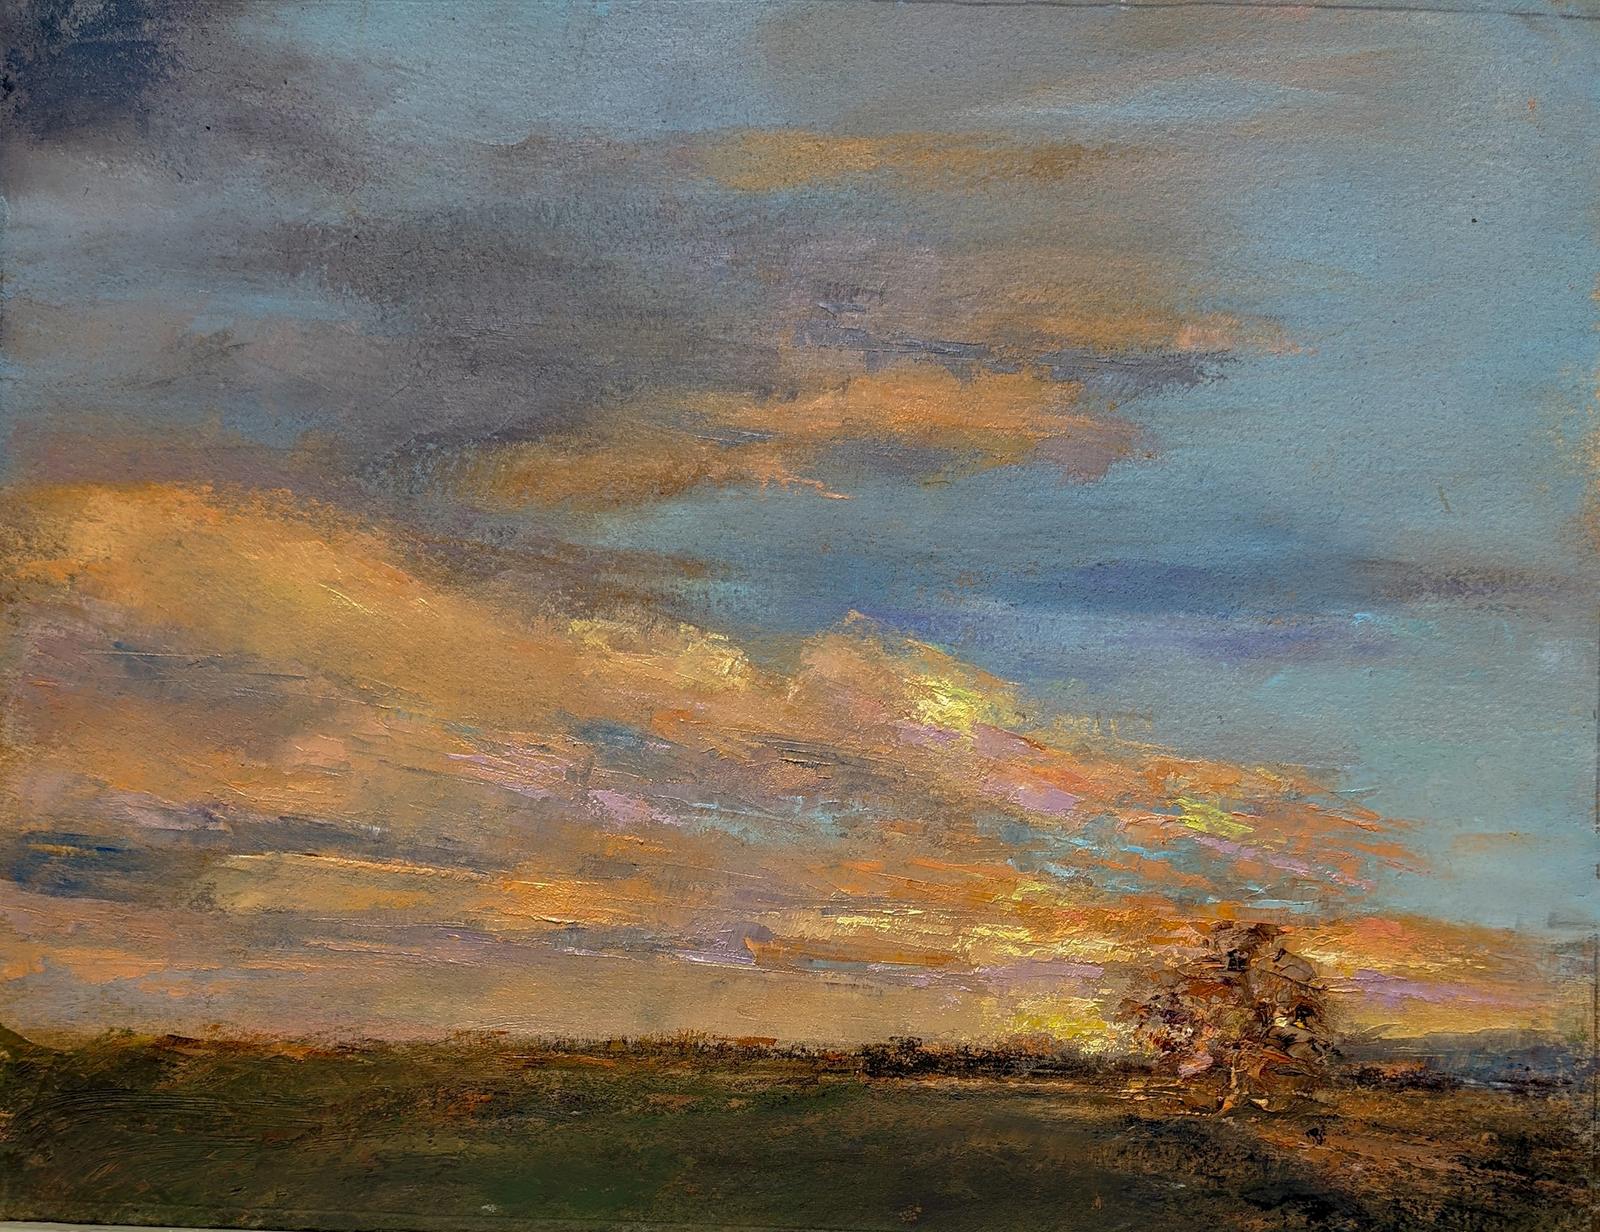 An oil painting of a fall sunset on the Coromandel Peninsula in New Zealand